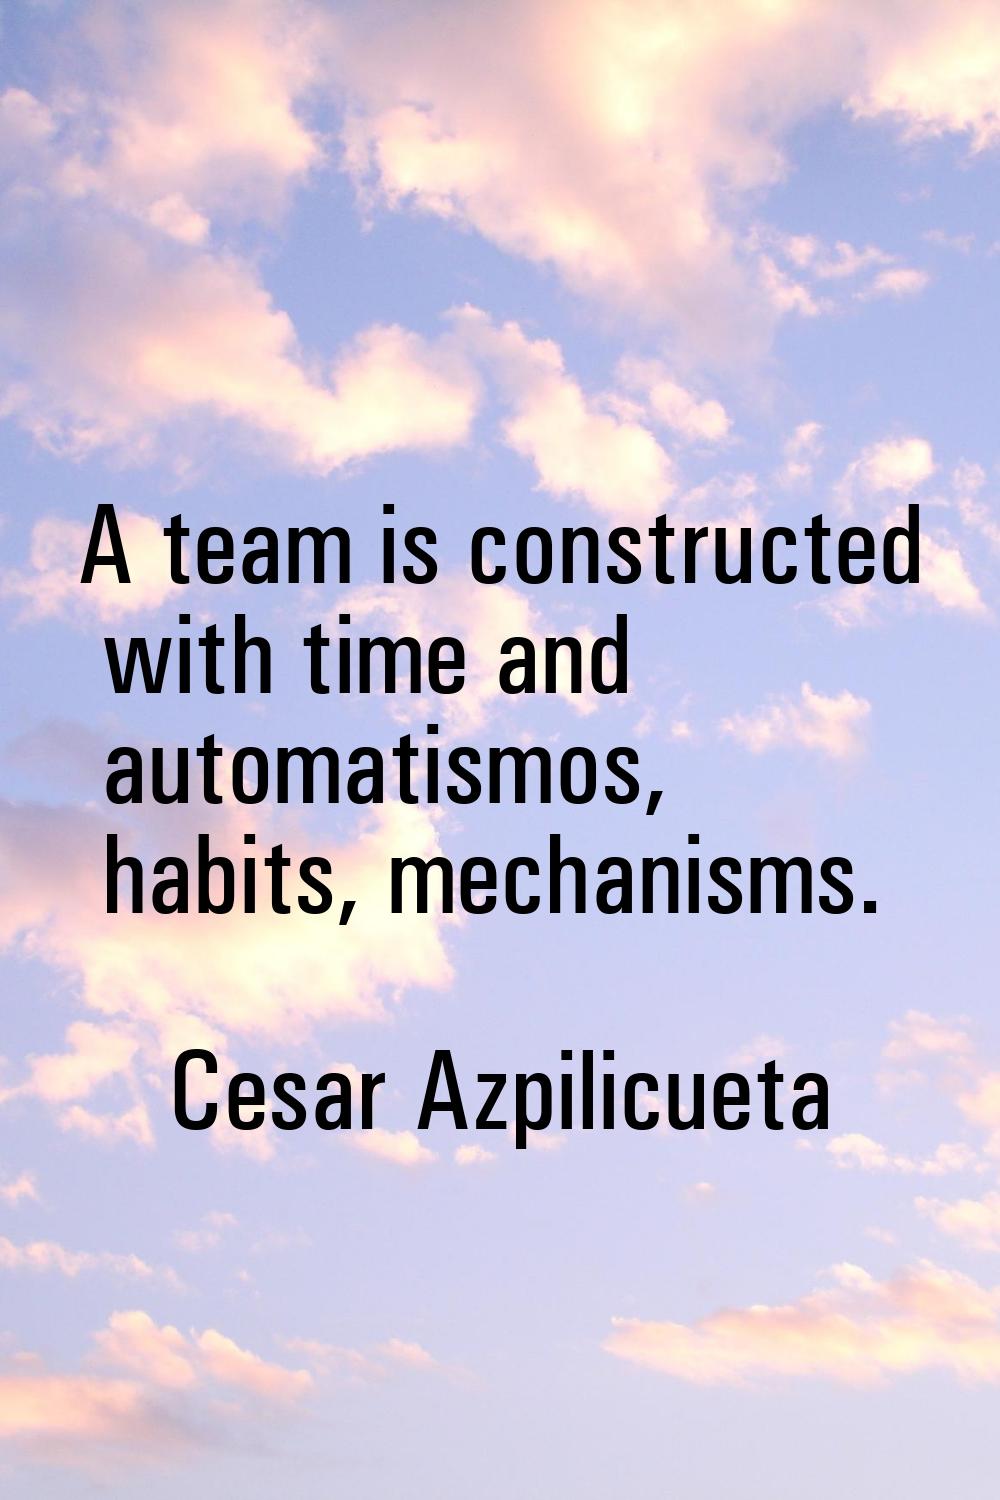 A team is constructed with time and automatismos, habits, mechanisms.